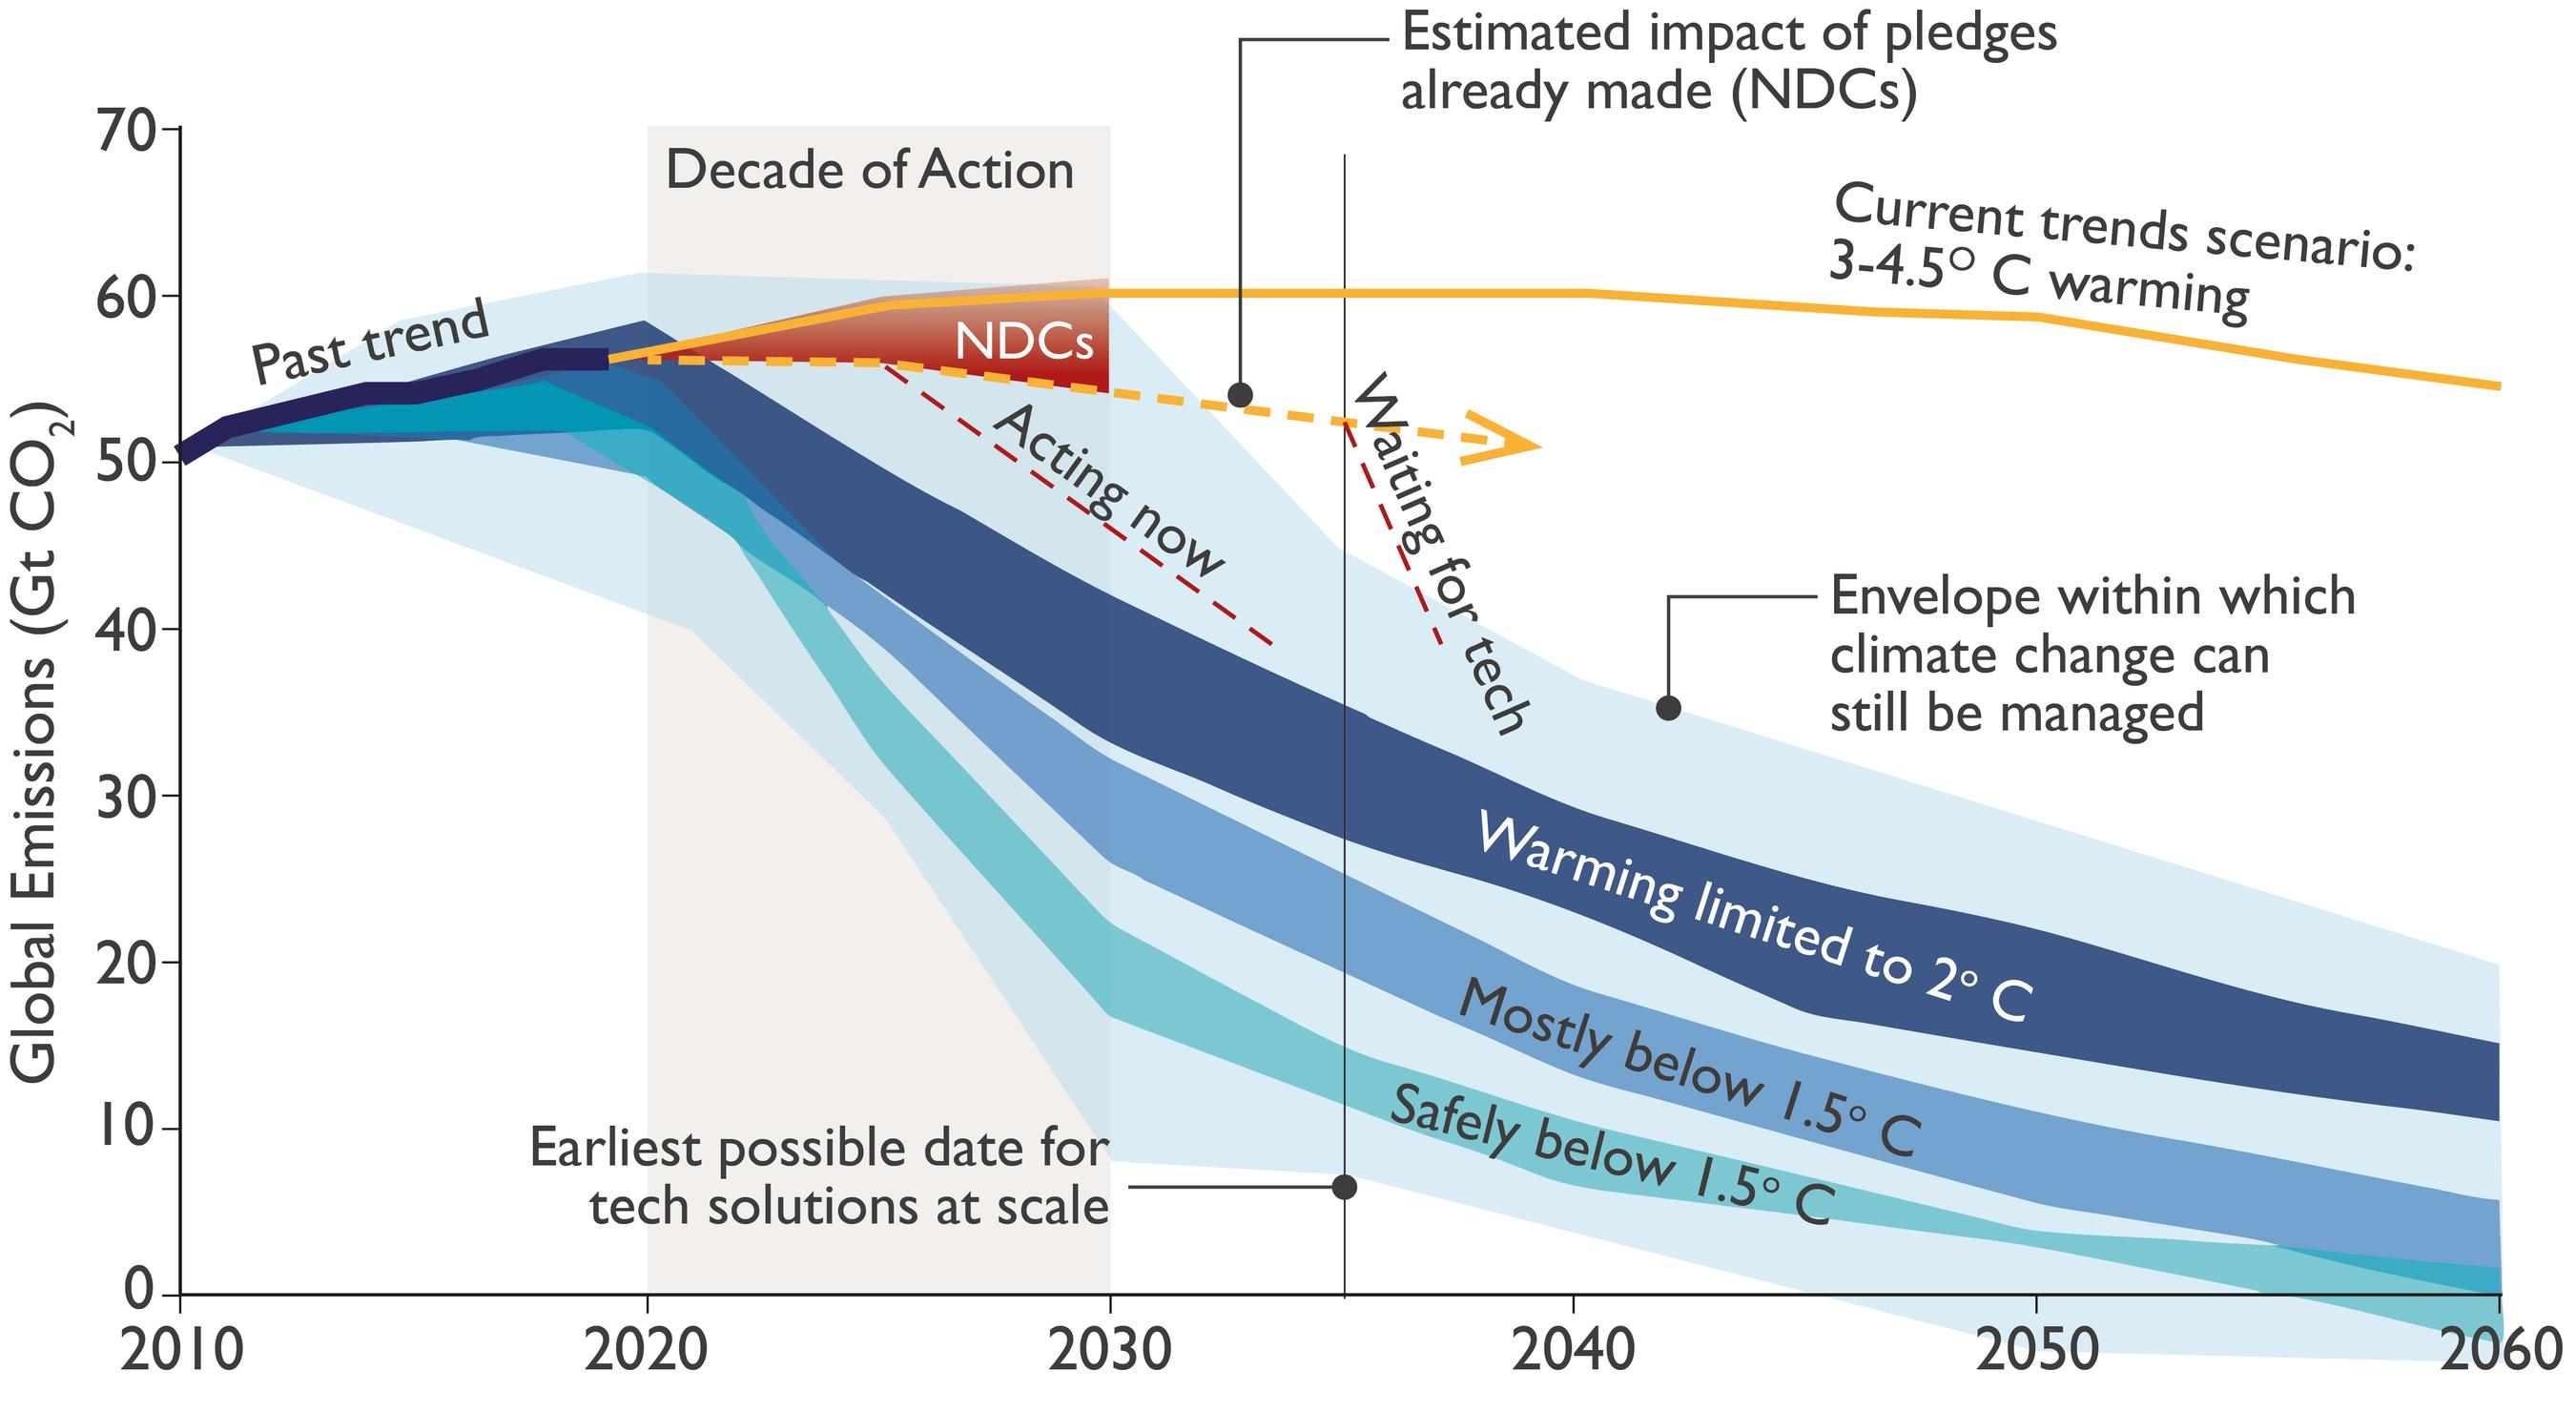 IPCC’s assessment of the impact of current pledges on climate change